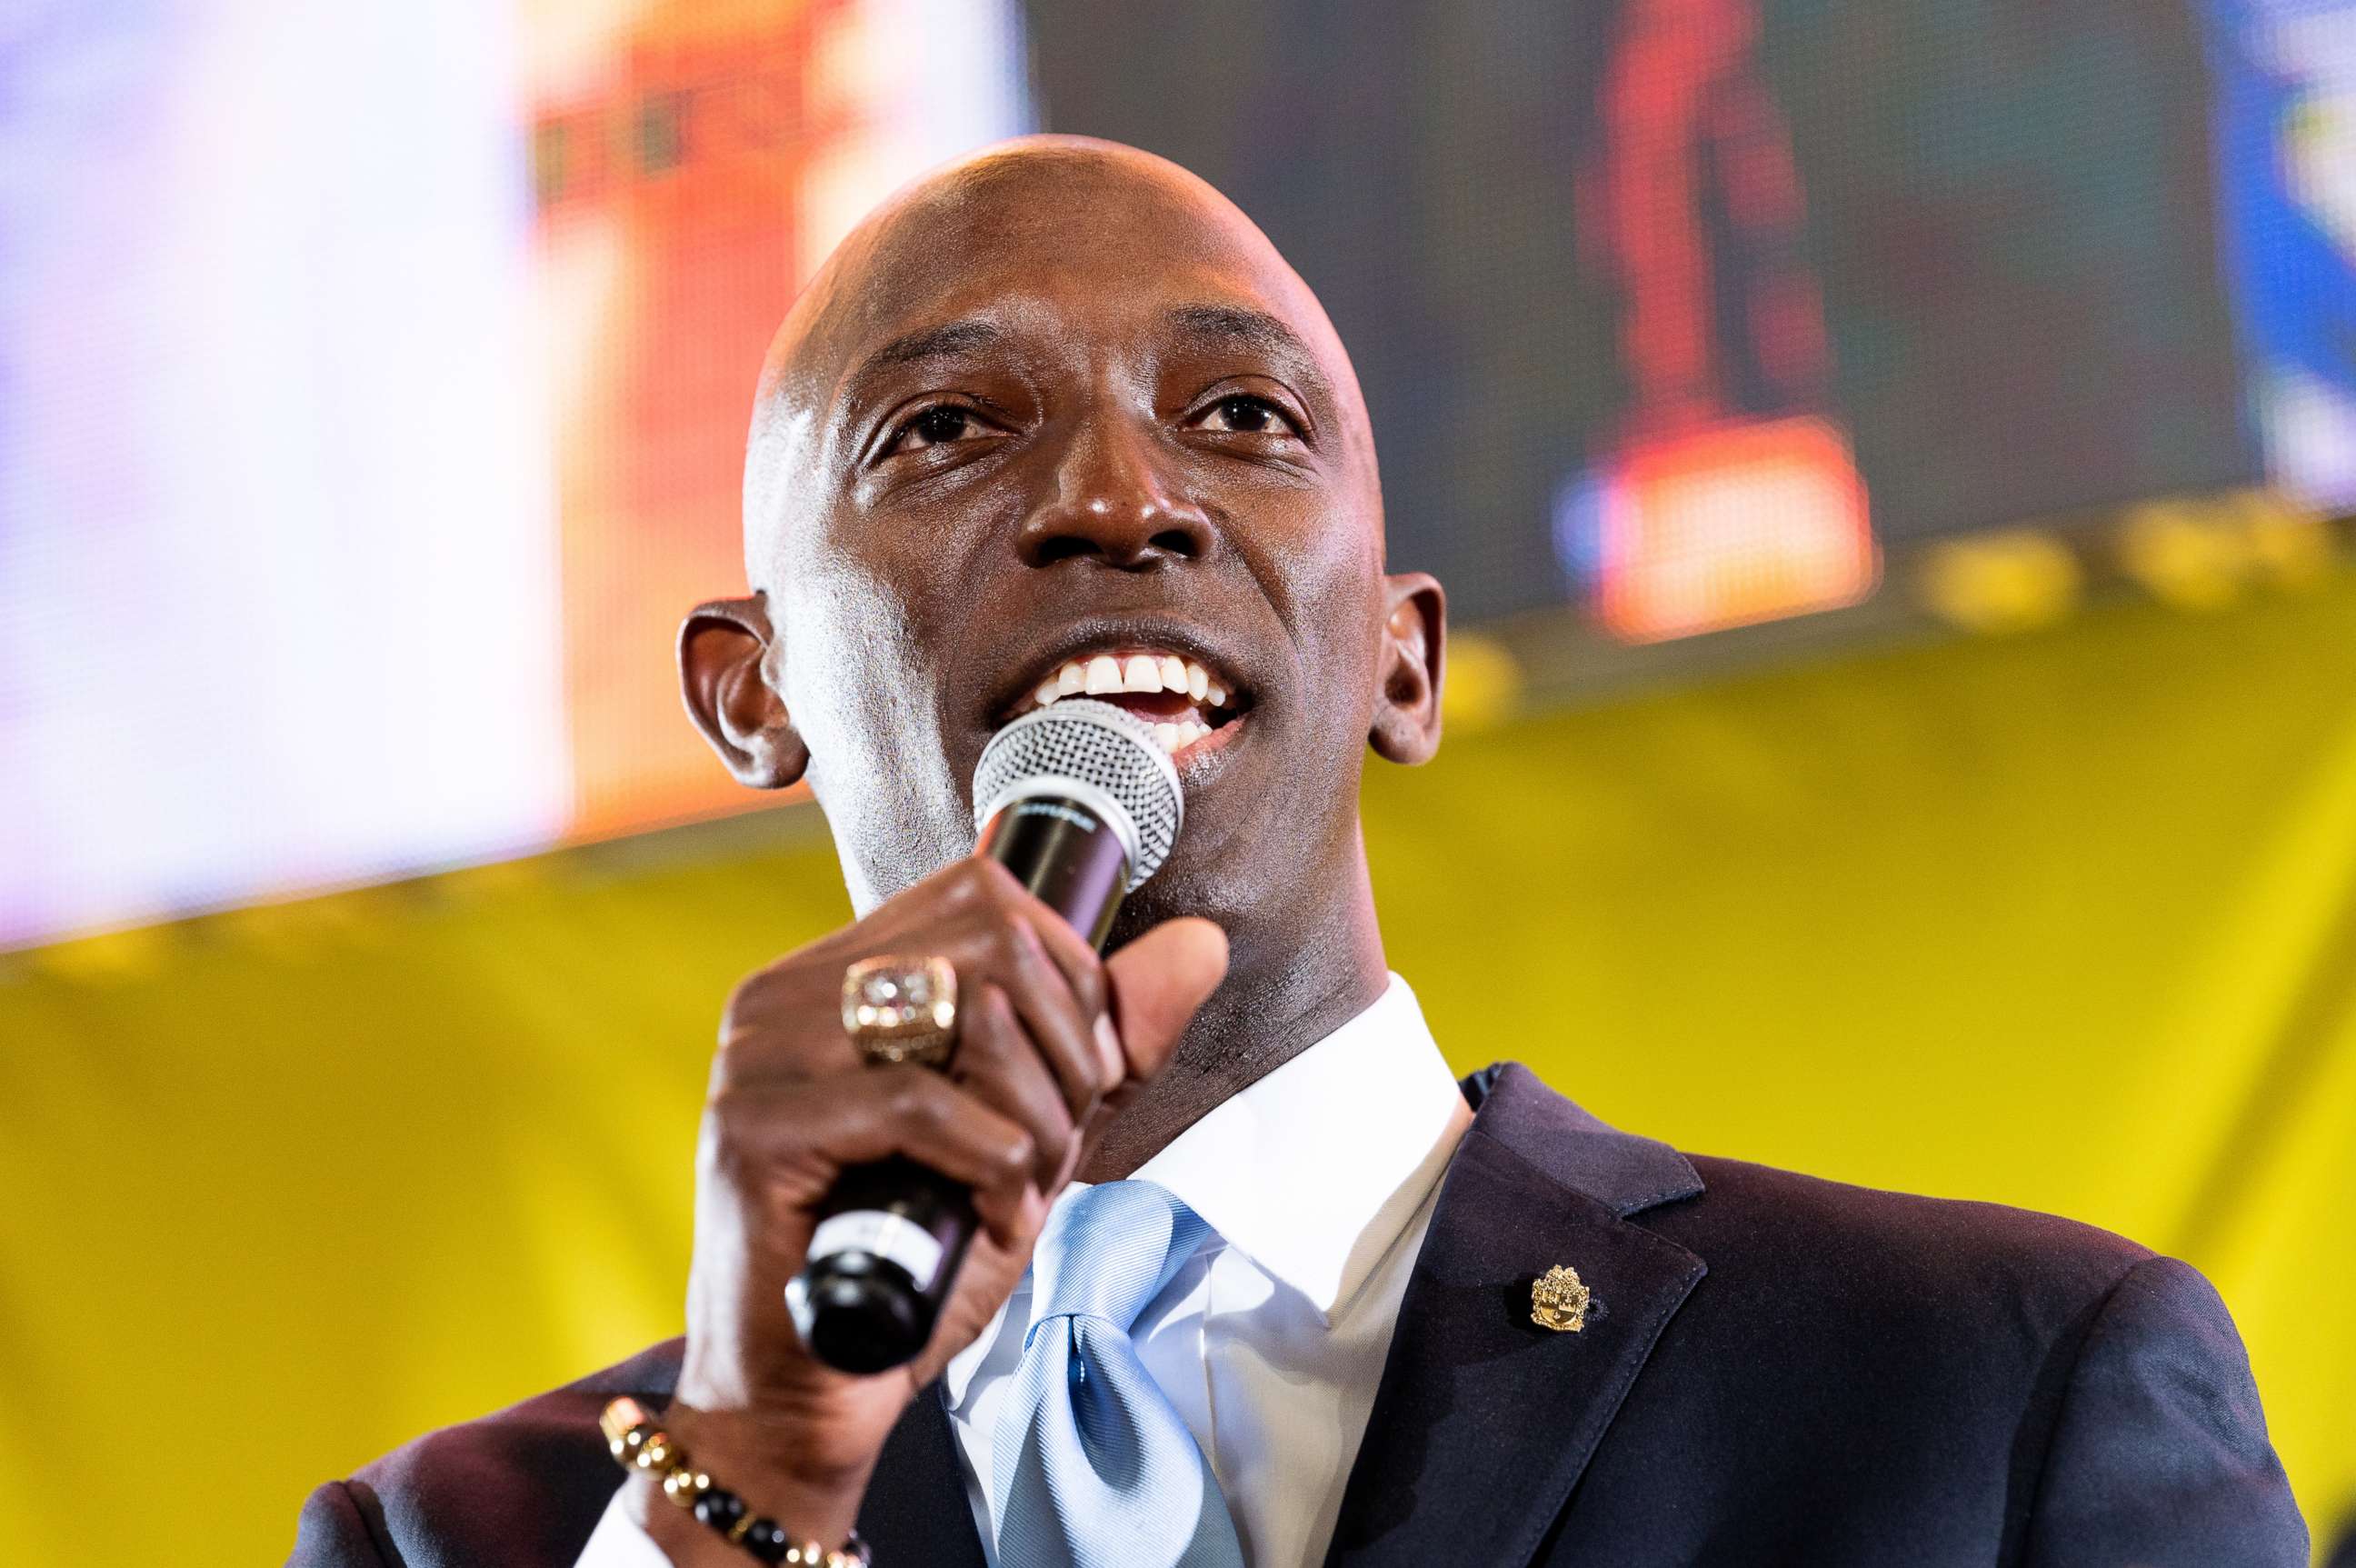 PHOTO: Wayne Messam speaks at the Poor Peoples Moral Action Congress taking place at Trinity Washington University in Washington, DC on June 17, 2019.